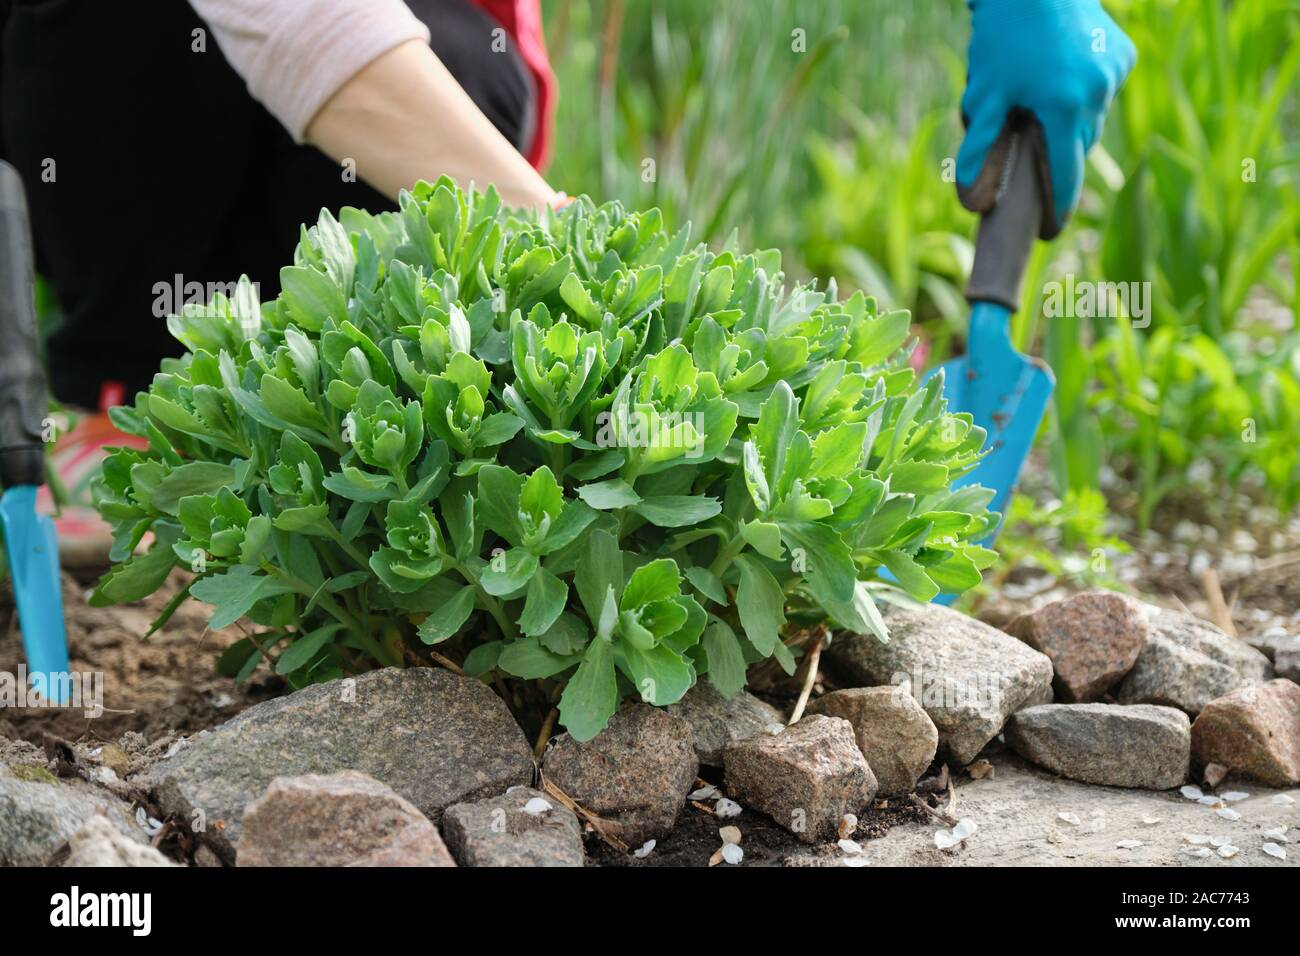 Spring Work In The Garden Woman Hands In Gloves With Garden Tools In Foreground Young Green Bush Sedum Telephium Stonecrop Stock Photo Alamy